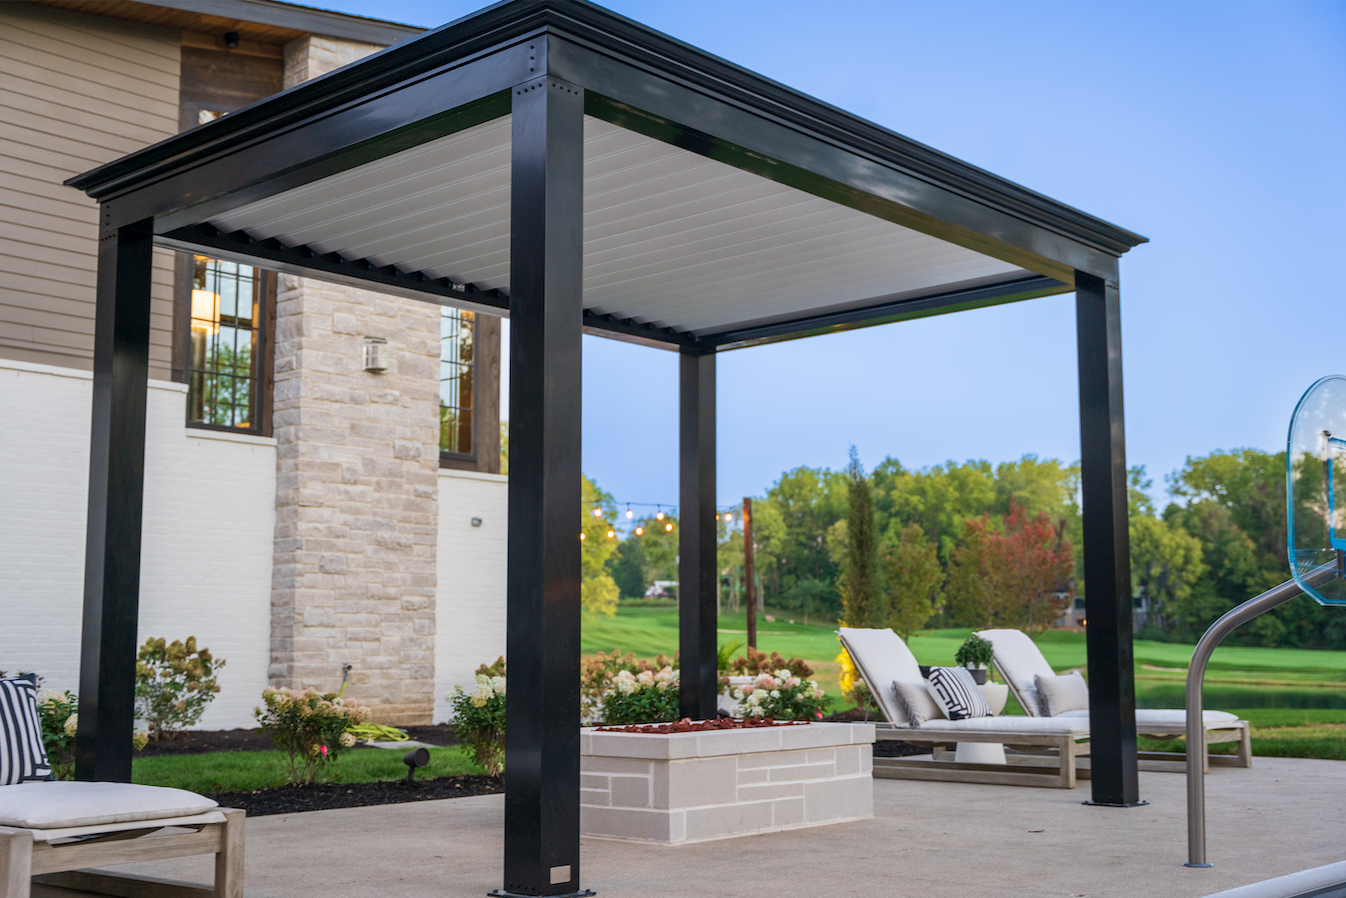 Custom motorized pergola can transform your outdoor living space